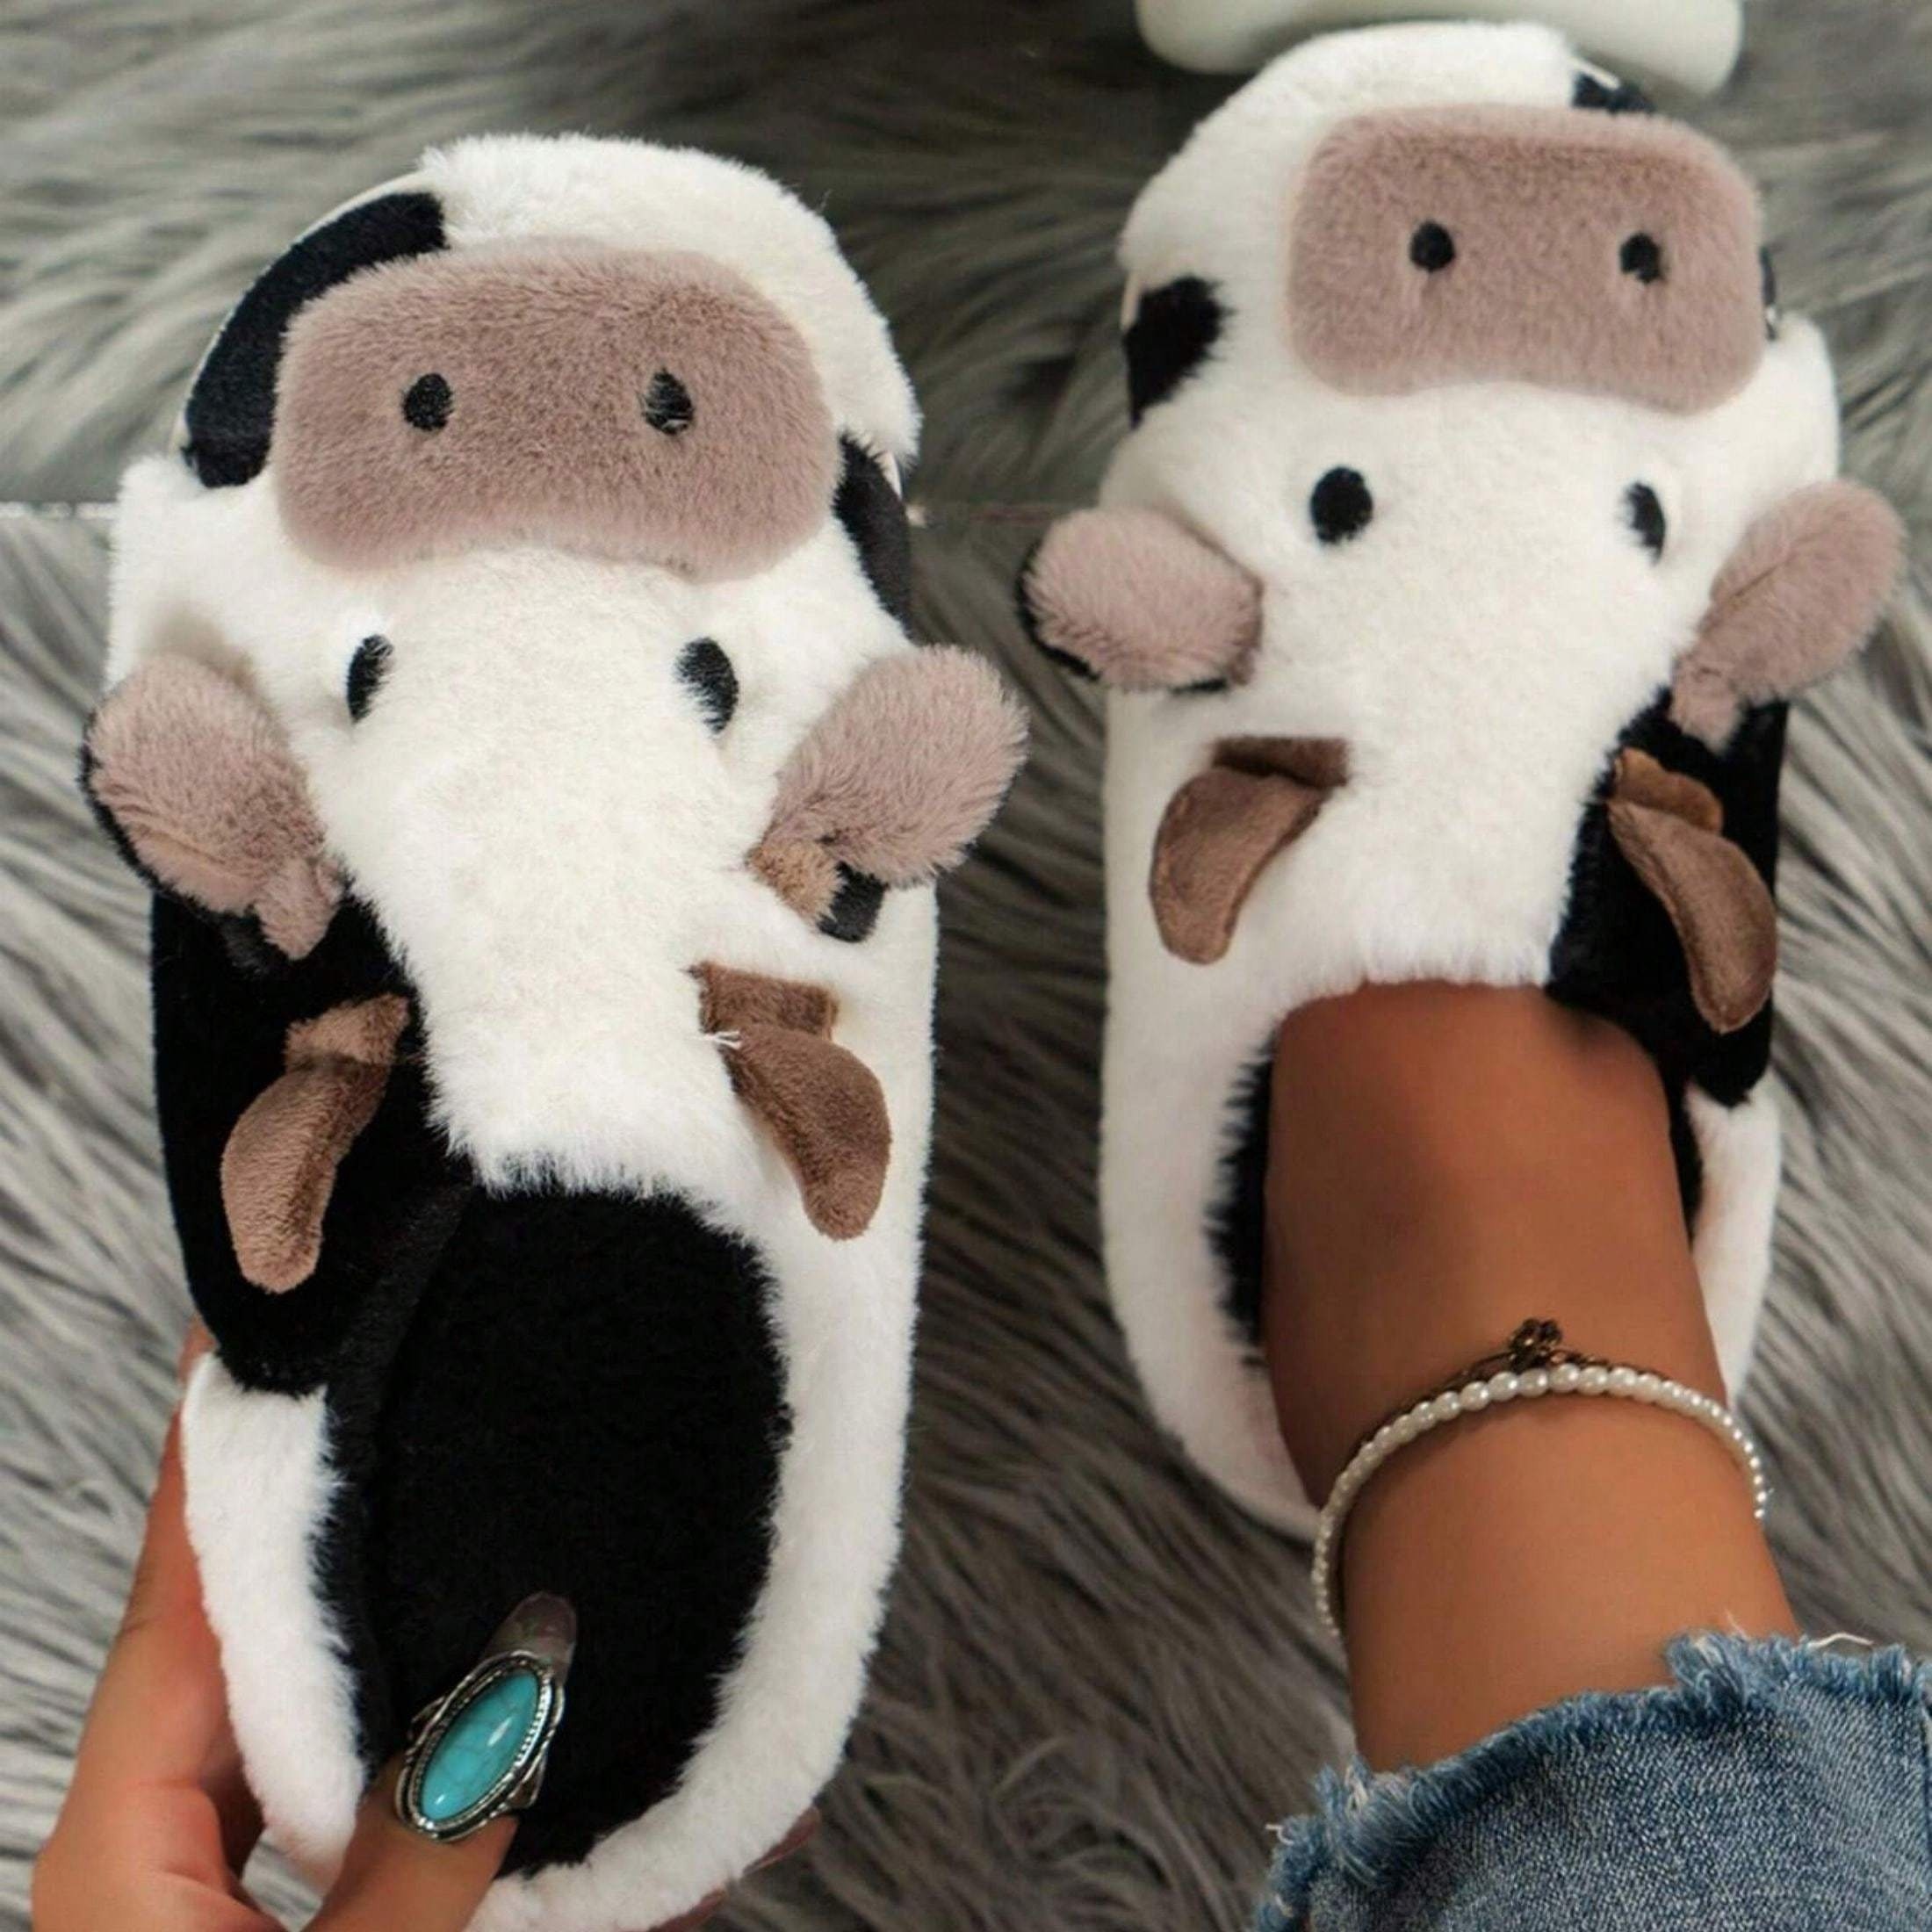 

Cow Slippers For Women Plush Animal Slippers Winter Warm Soft Slippers Soft Thick Sole Fur Shoes Home Sliders For Indoor Outdoor